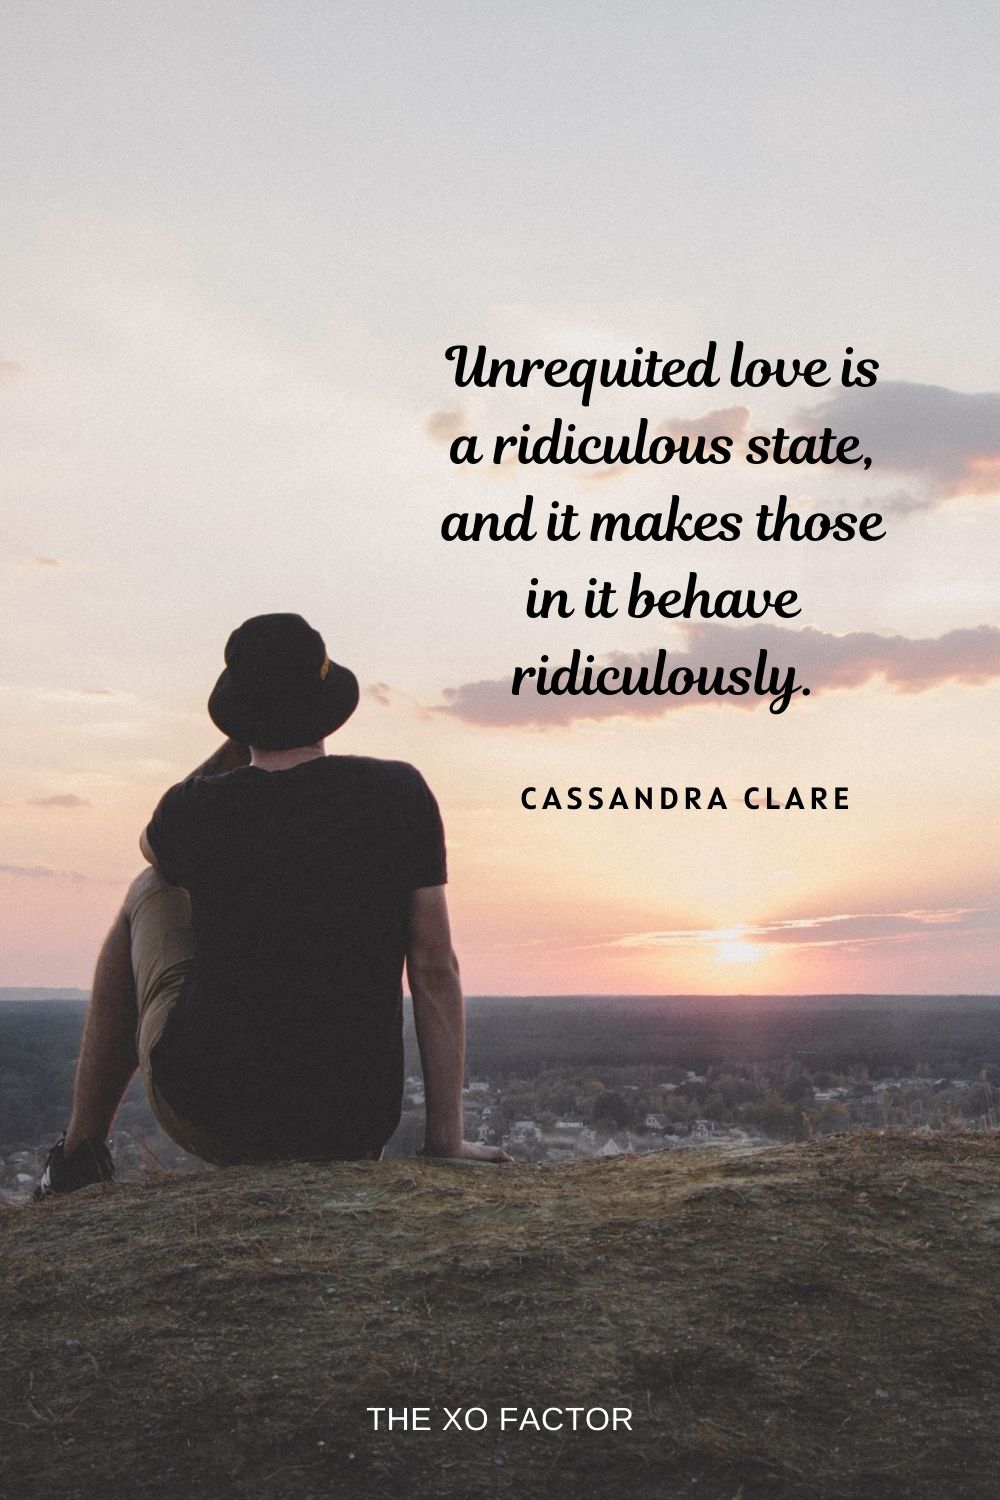 Unrequited love is a ridiculous state, and it makes those in it behave ridiculously. Cassandra Clare